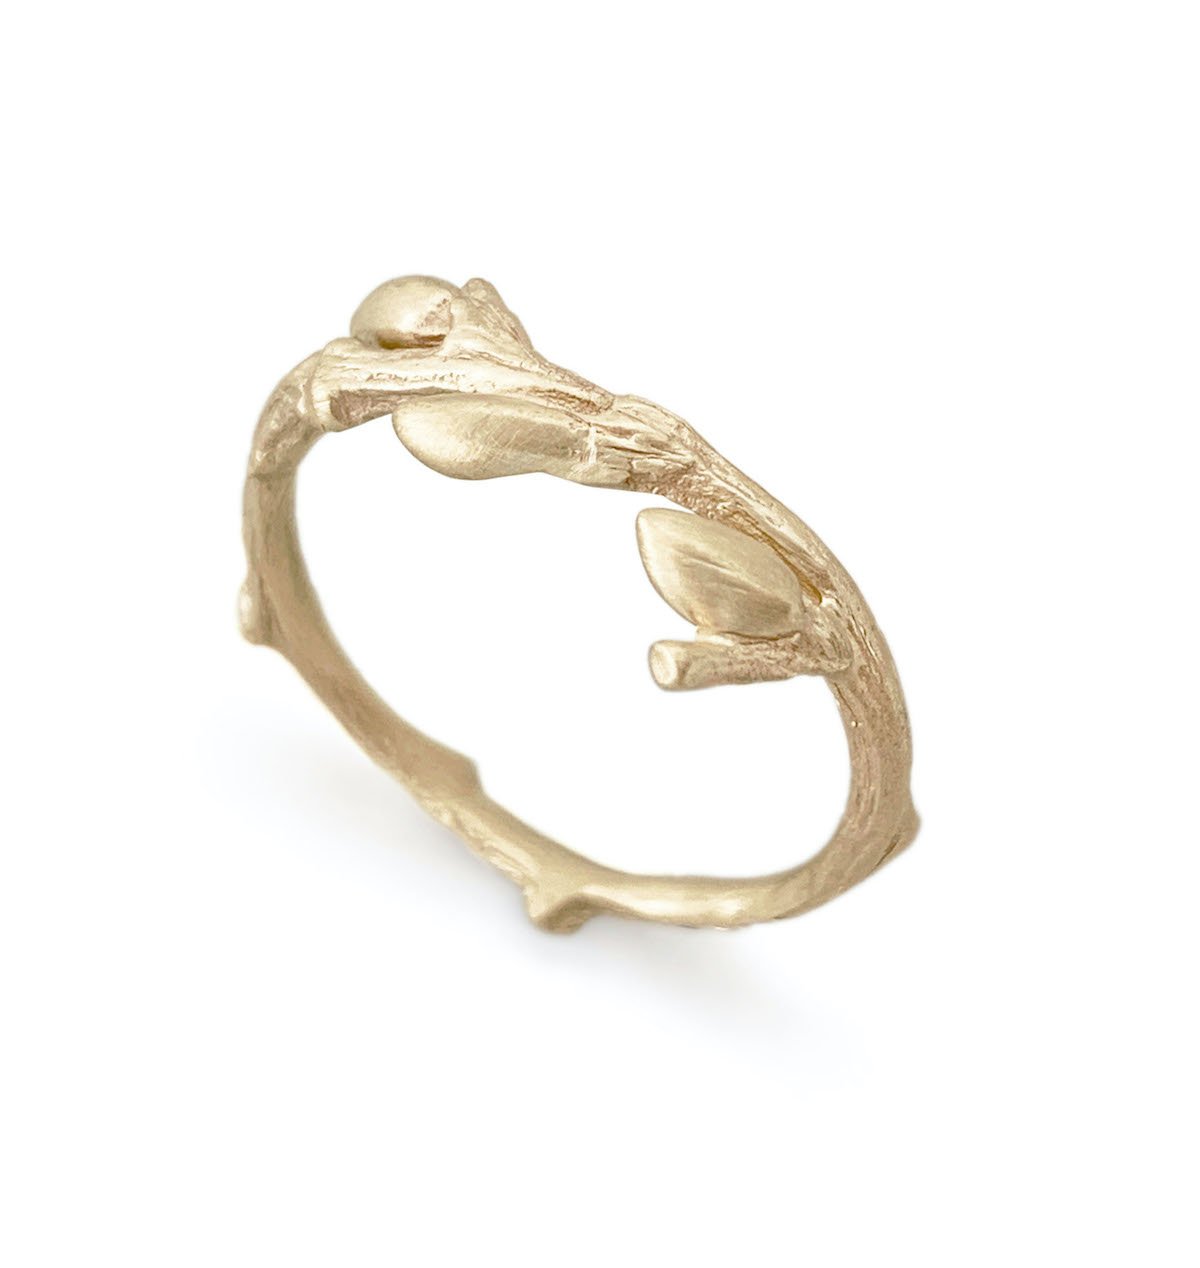 Brandts Jewellery willow twig wedding ring yellow gold with buds - Ayshe Brandts.jpg